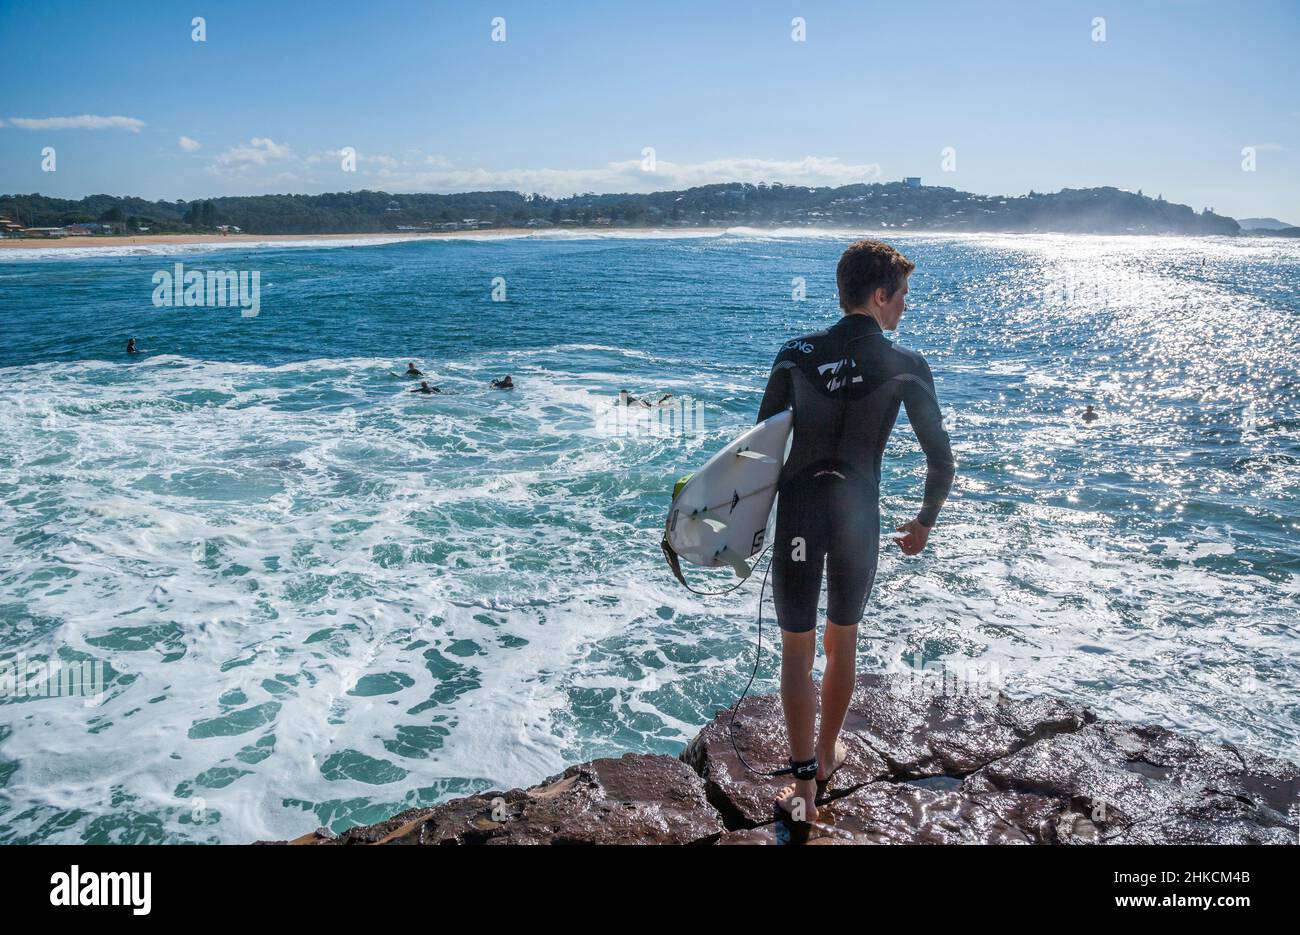 young surfer contemplating to enter the tumultuous surf from the perilous coastal rock platform at Mugs Rock, Avoca Beach, Central Coast, New South Wa Stock Photo